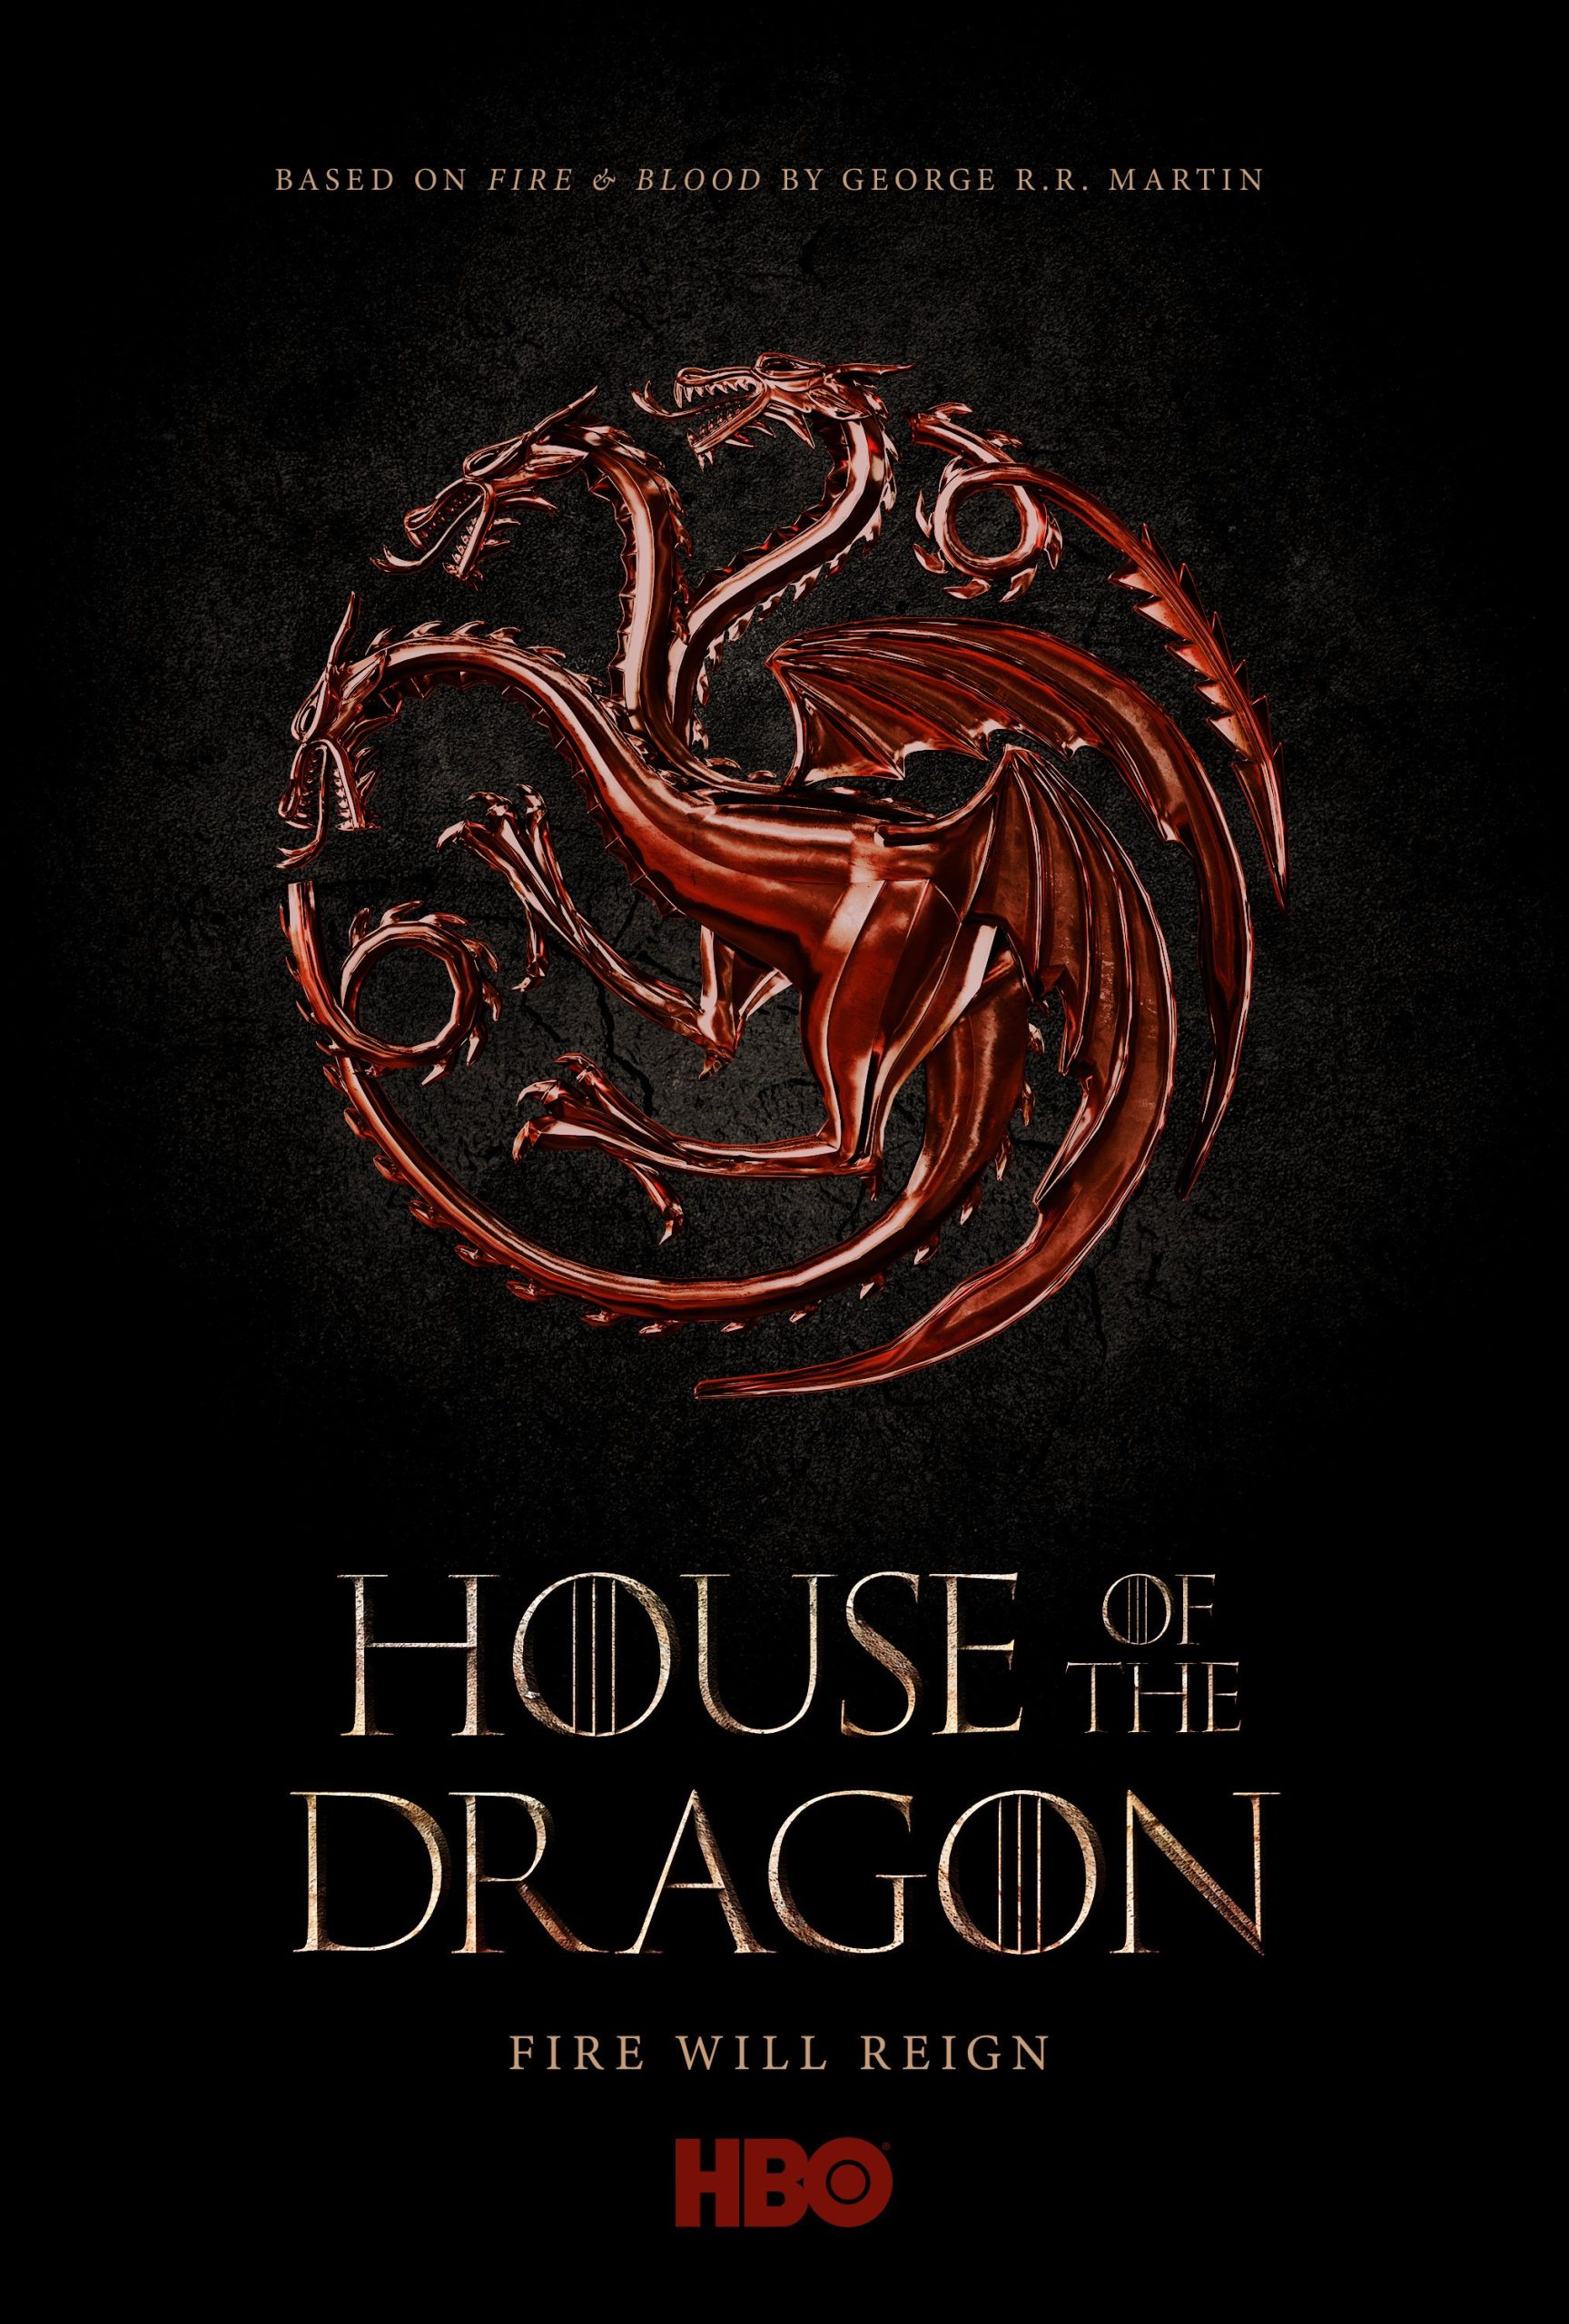 HBO reveals new Game of Thrones spinoff House of the Dragon